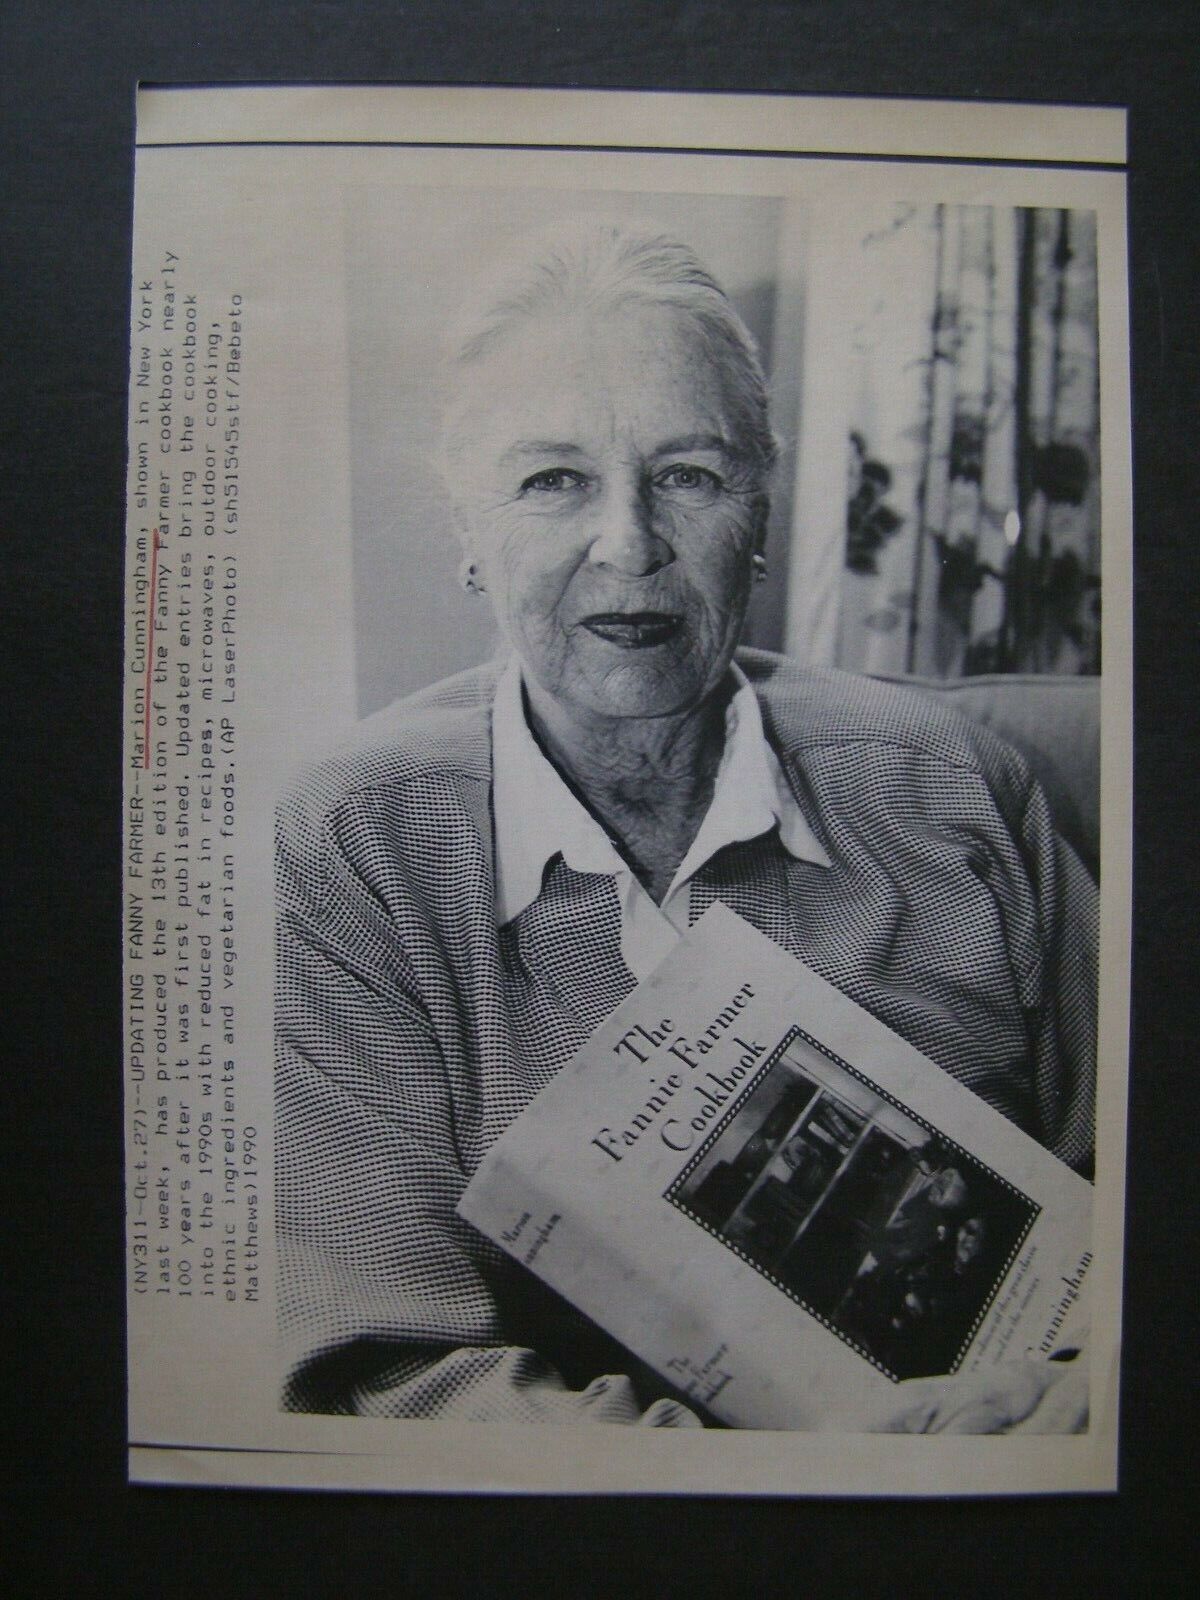 AP Wire Press Photo 1990 Marion Cunningham Author of The Fanny Farmer Cookbook